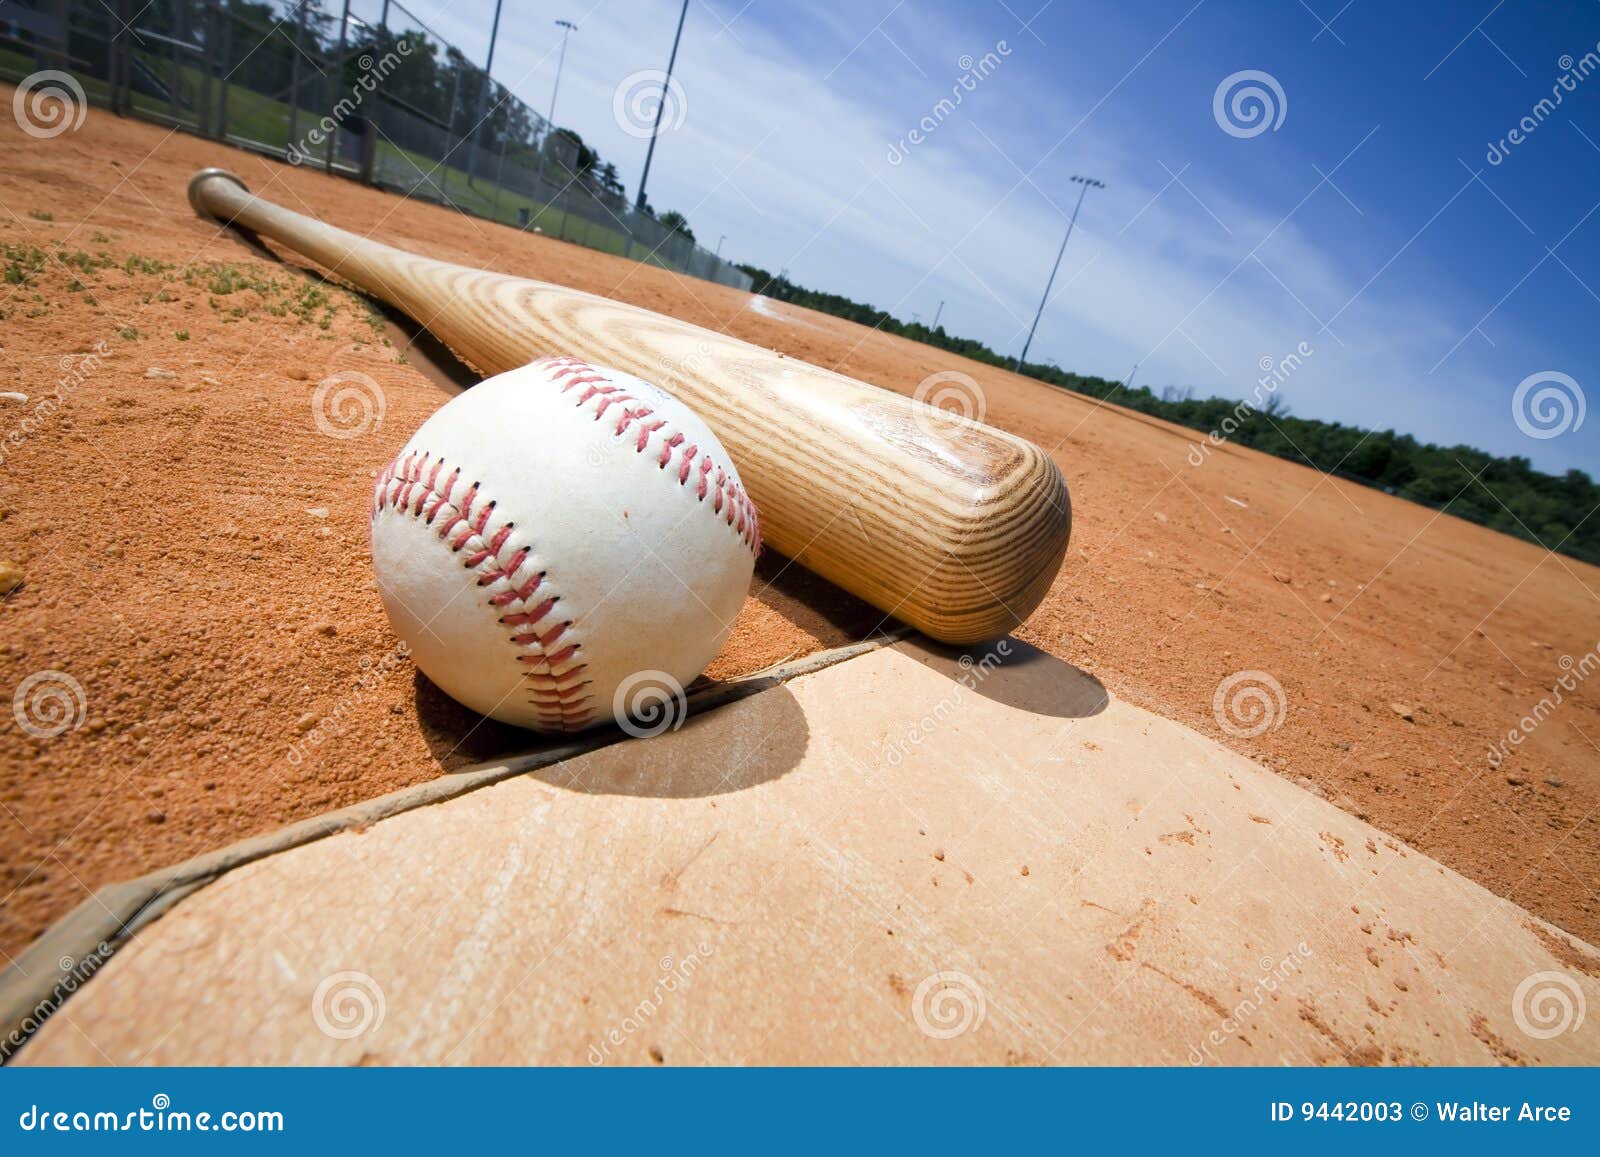 994 Baseball Bat Home Plate Photos Free Royalty Free Stock Photos From Dreamstime